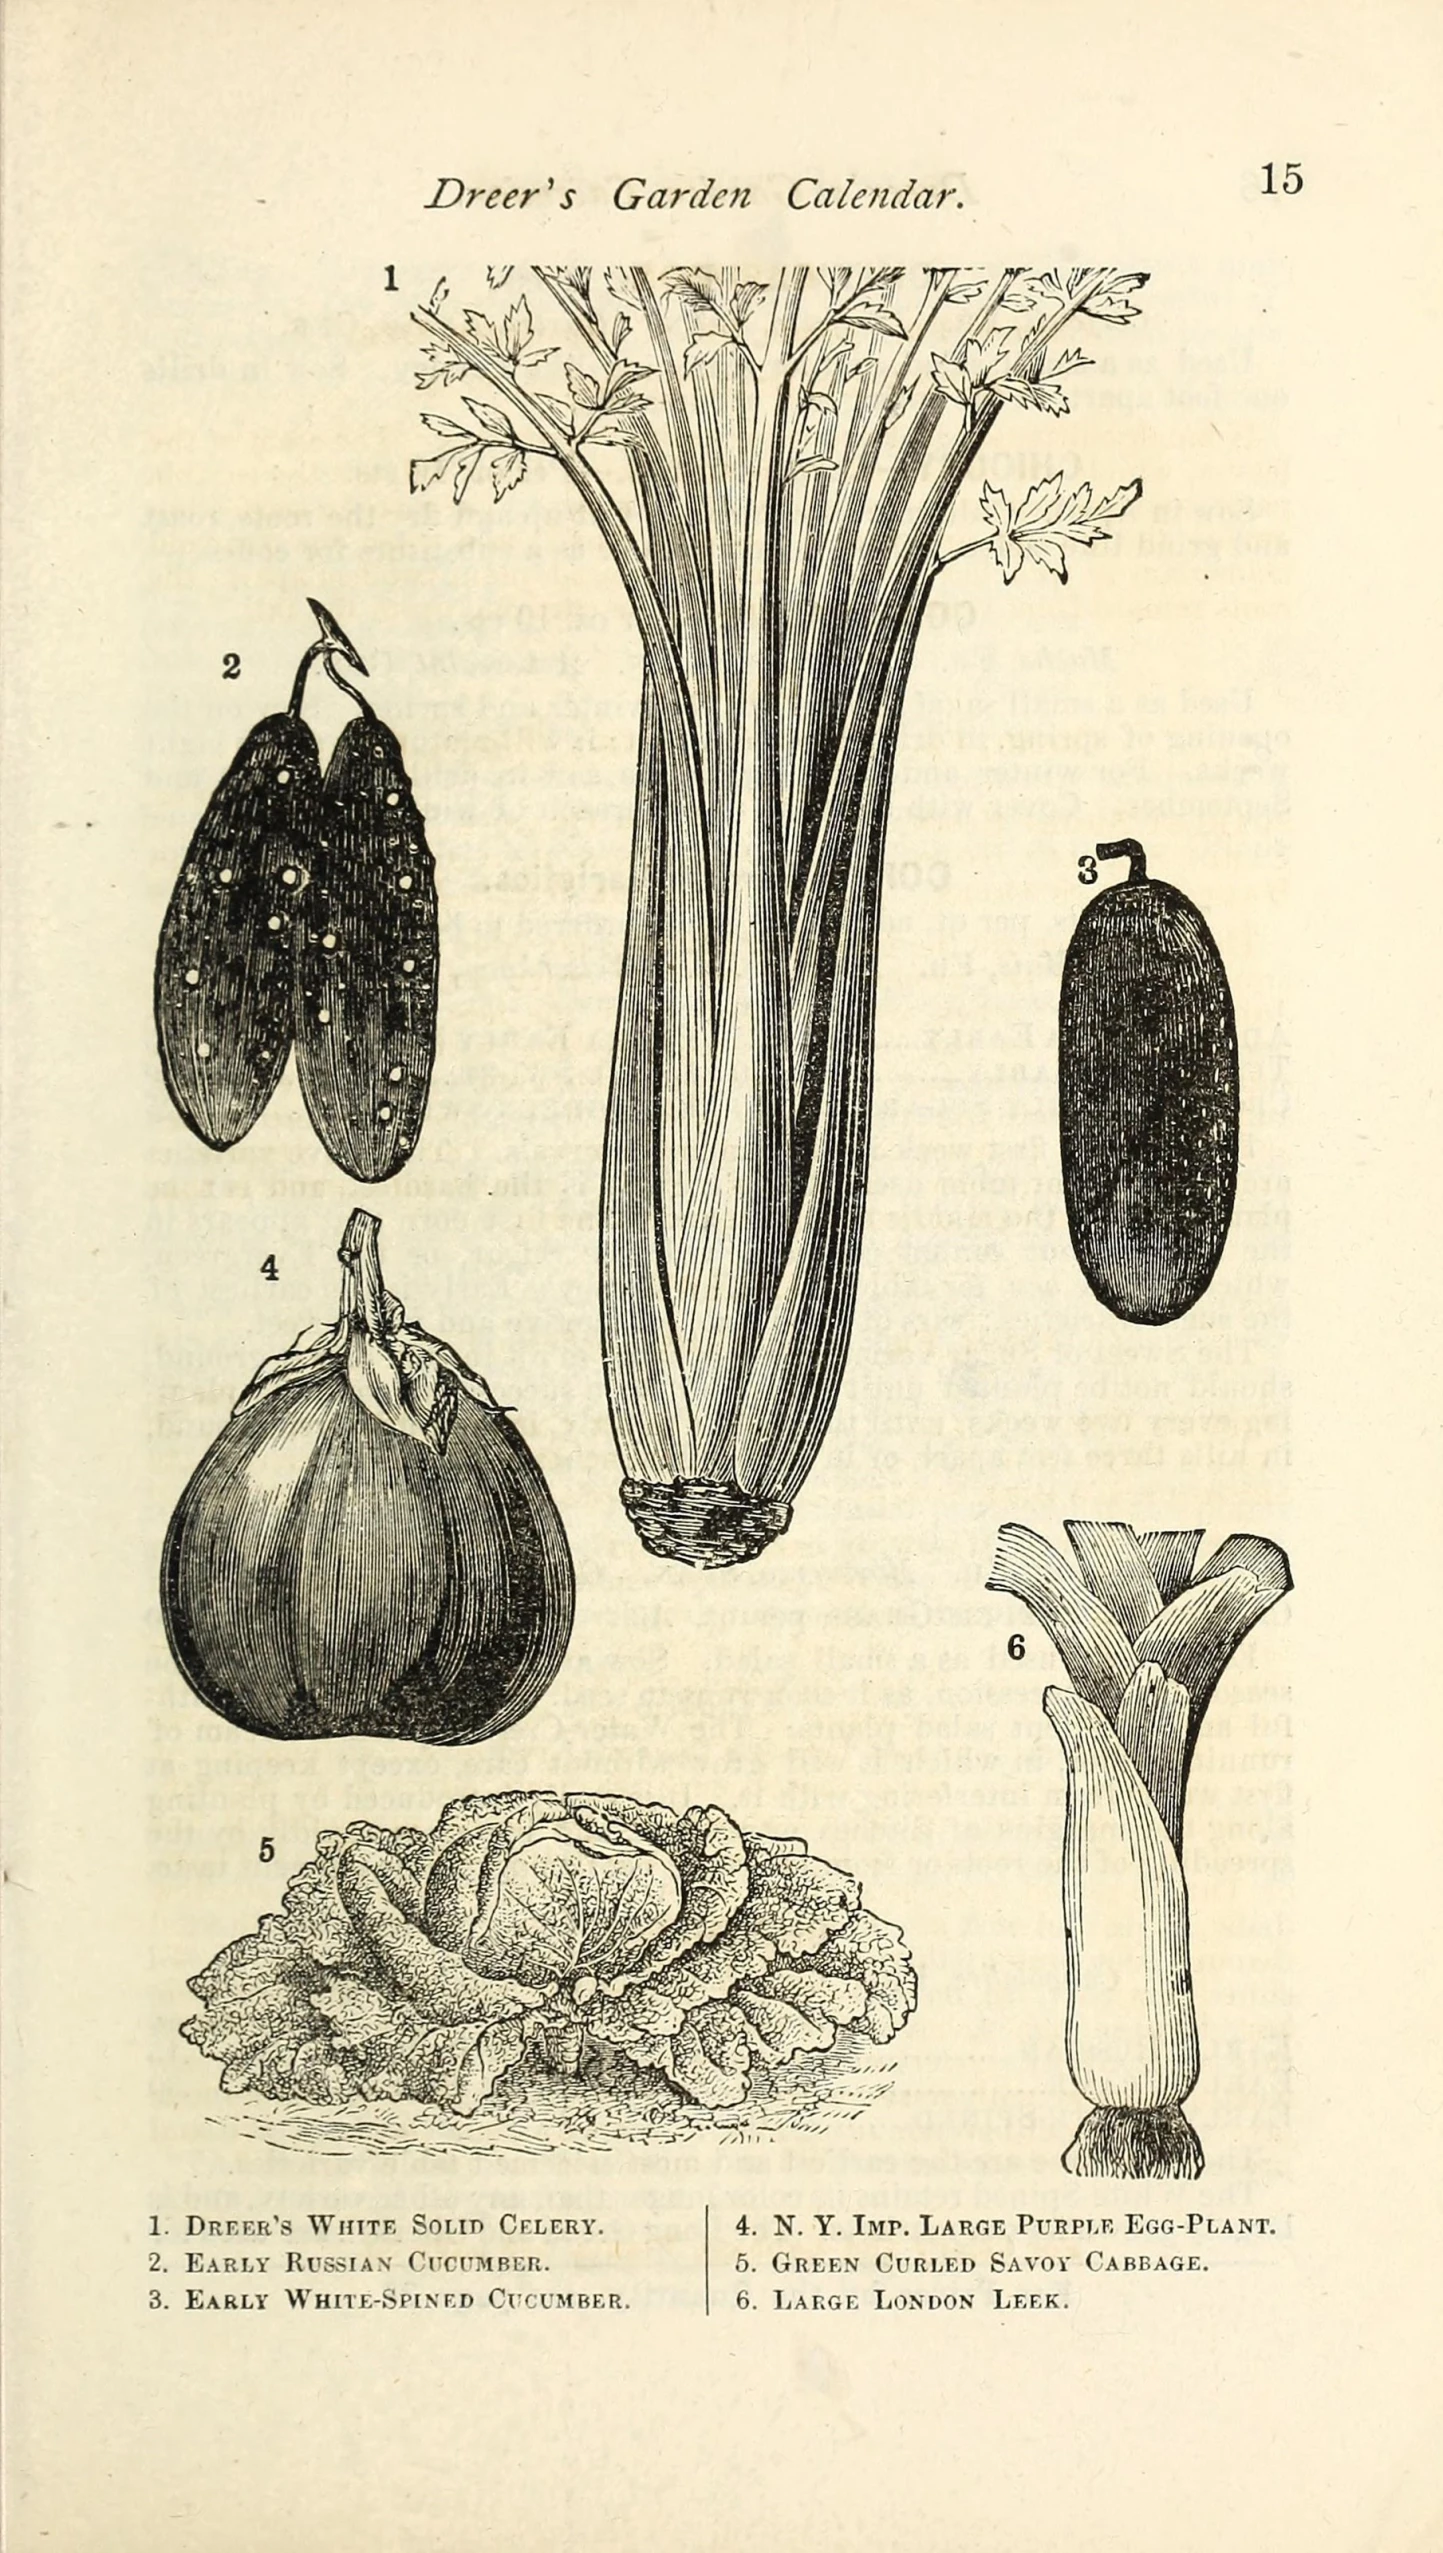 an illustration of a tree nch and fruit, with other trees